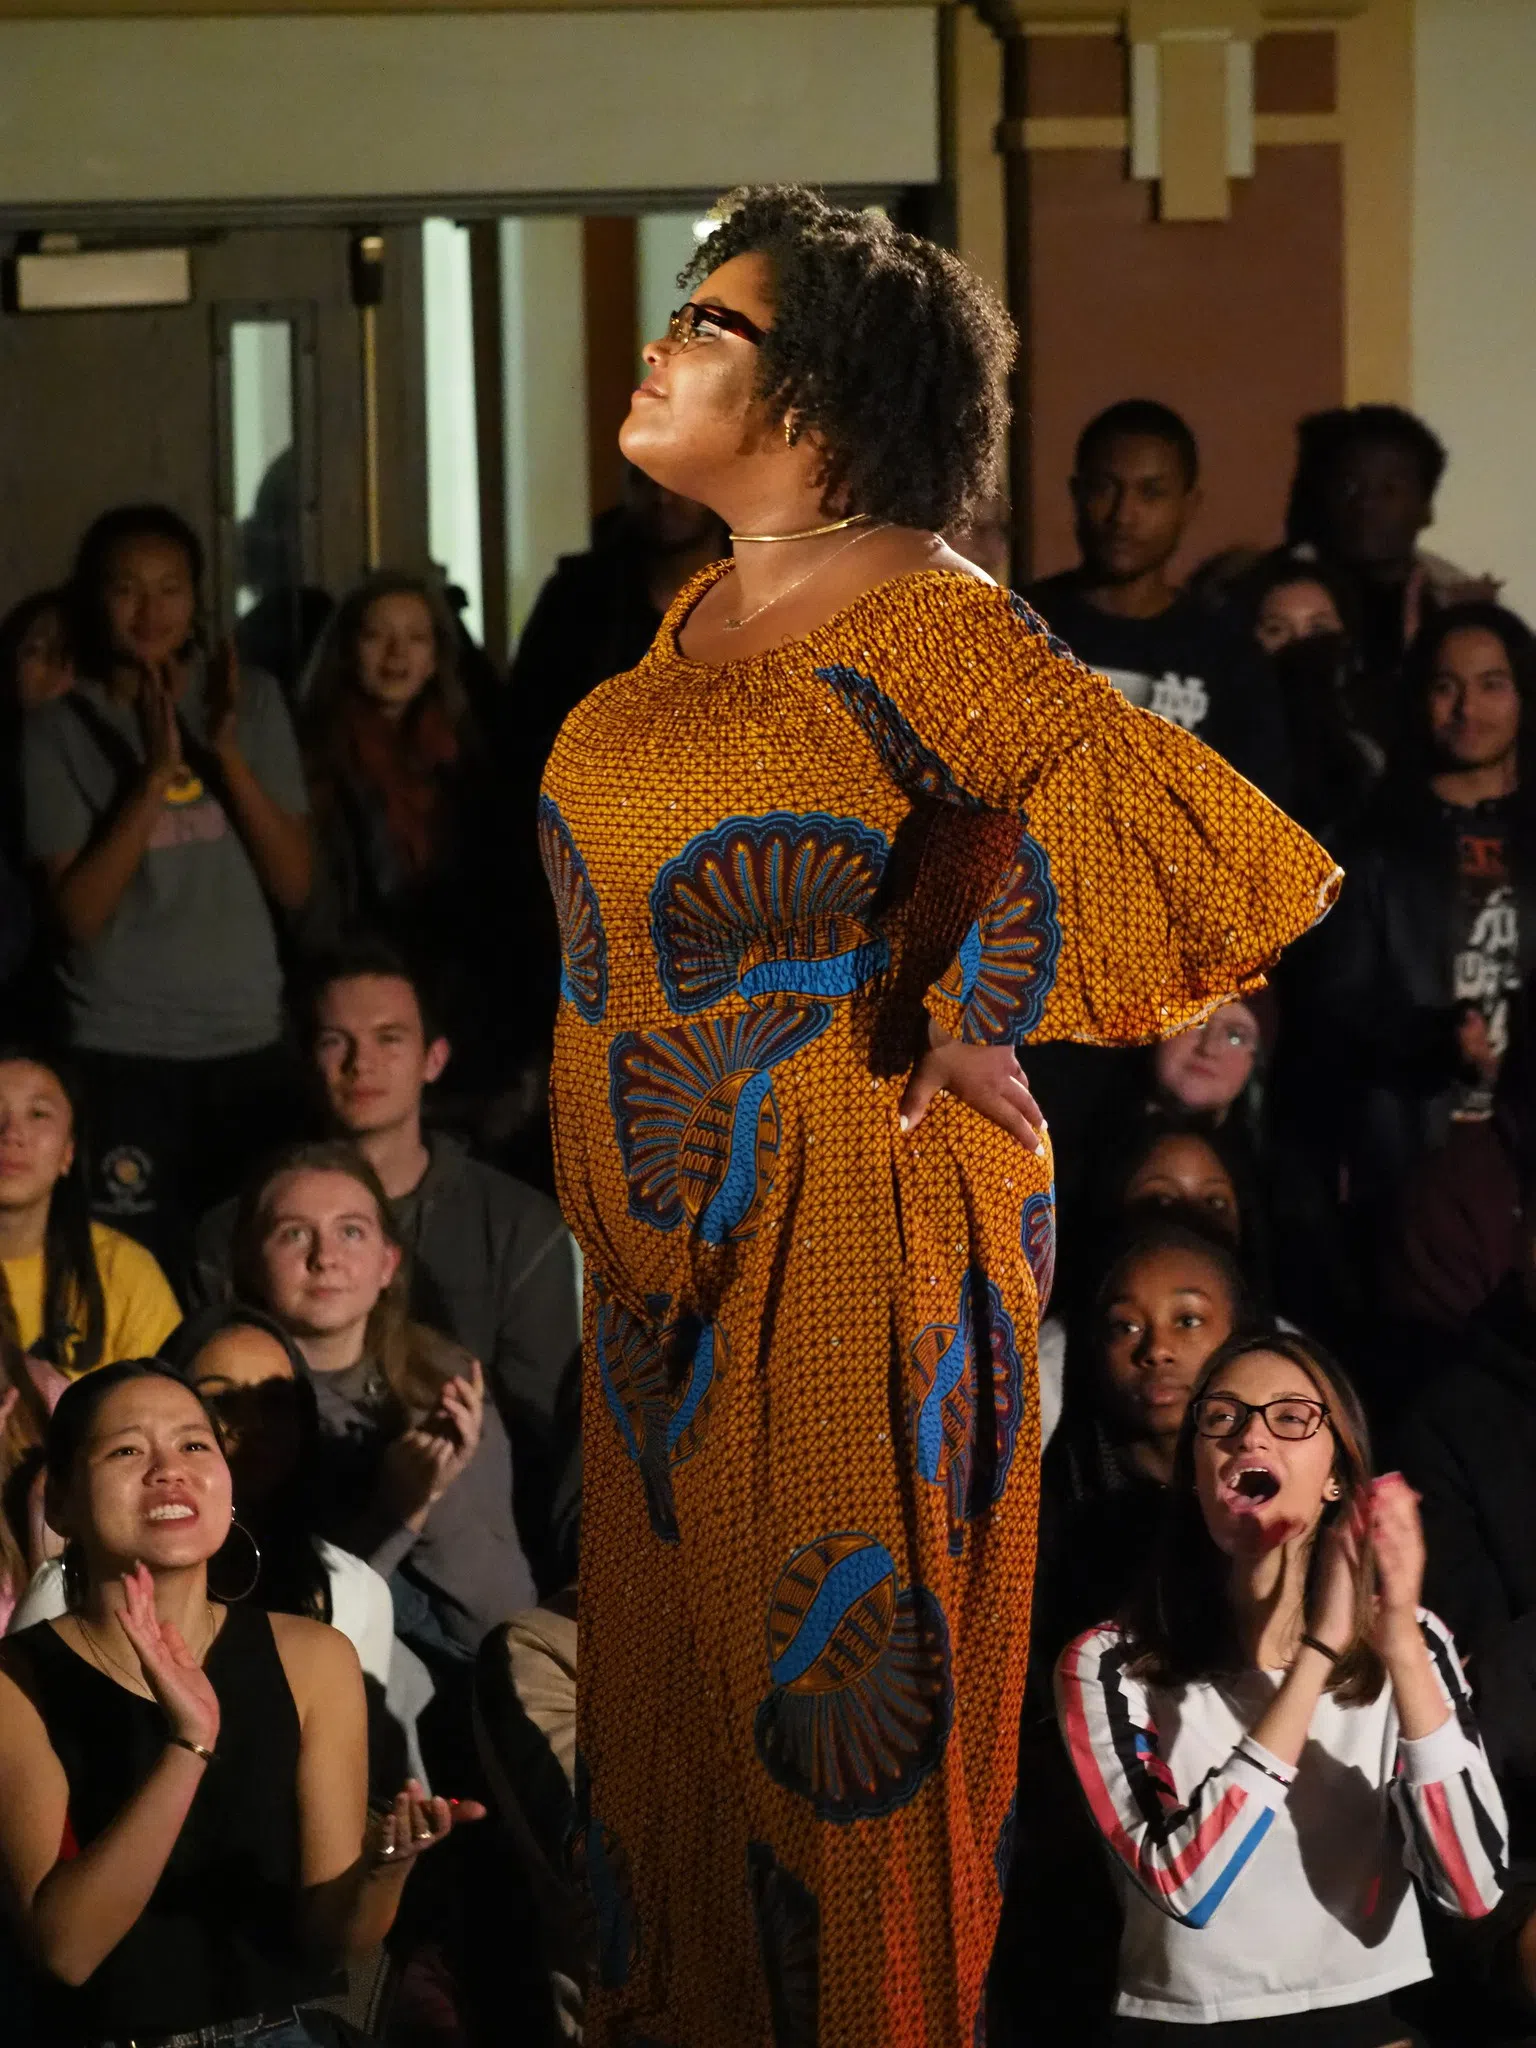 A Black student in a brightly colored dress poses at the end of the runway at Oberlin's annual Black history month fashion show.